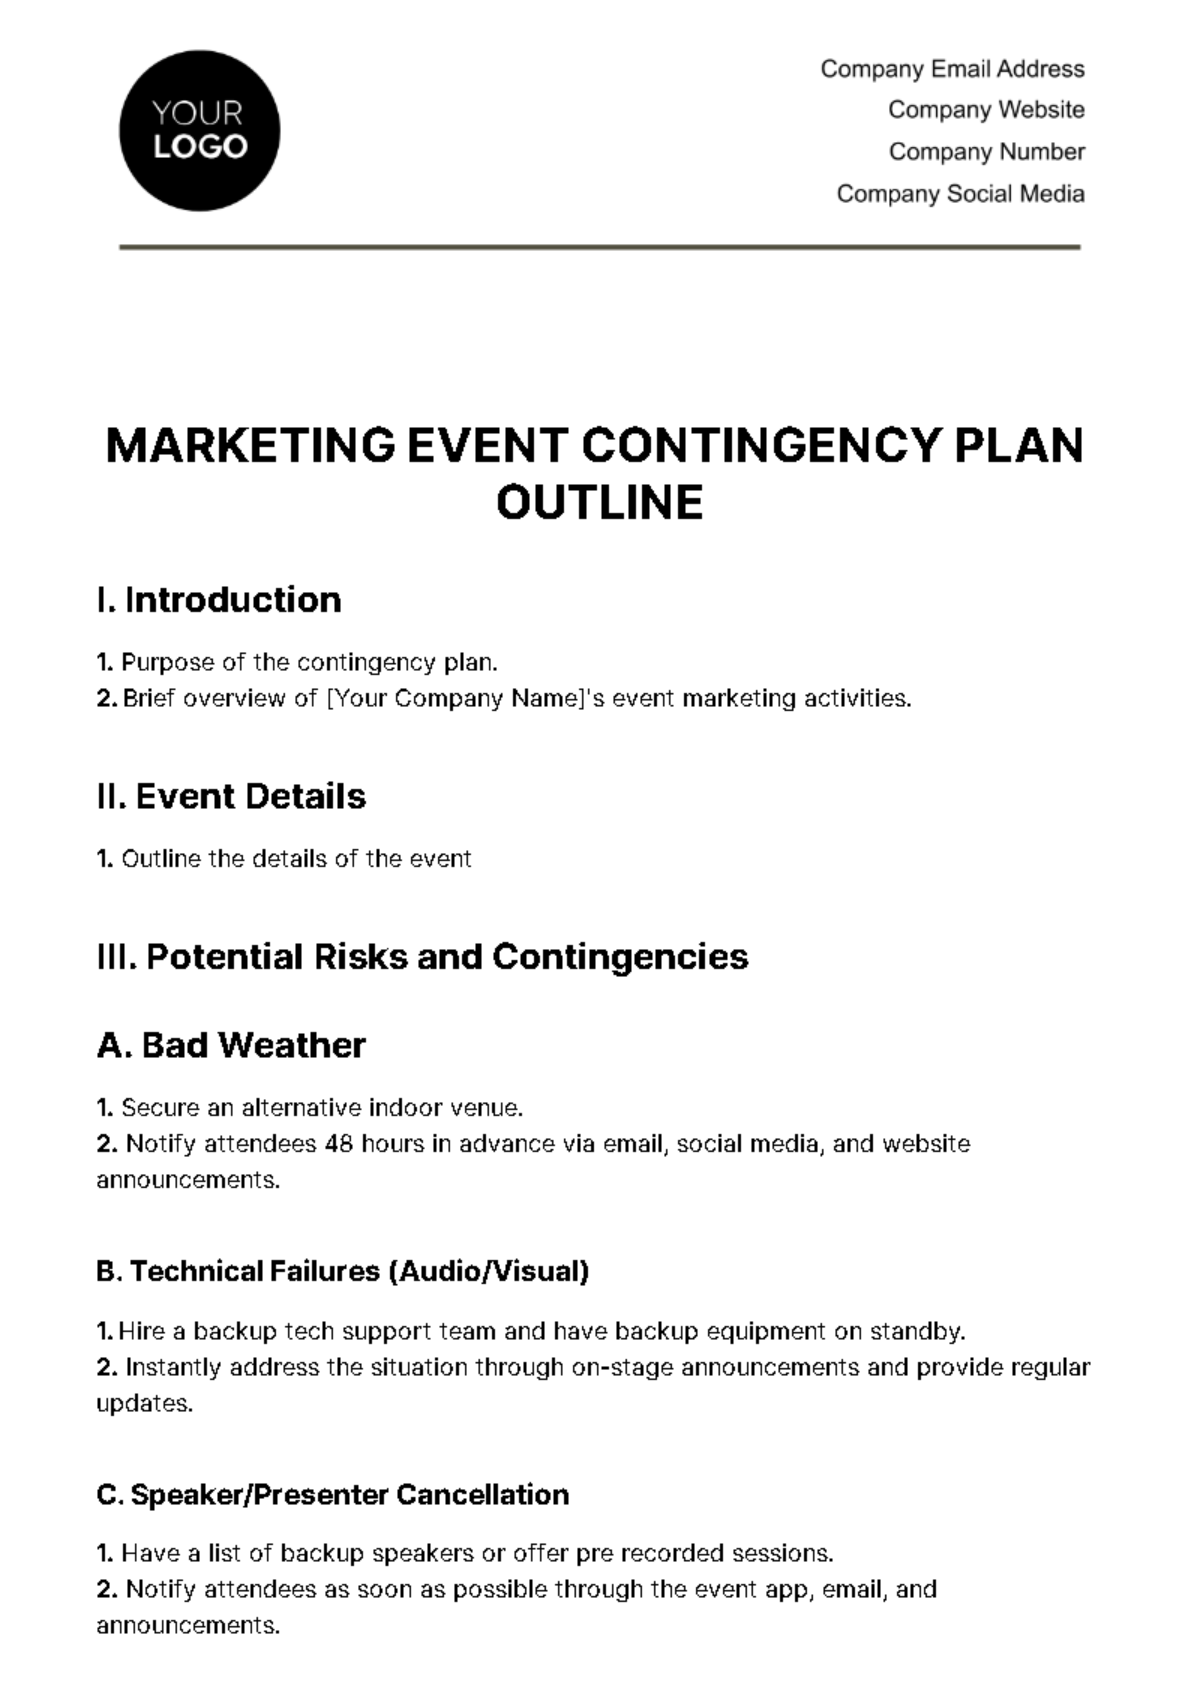 Free Marketing Event Contingency Plan Outline Template